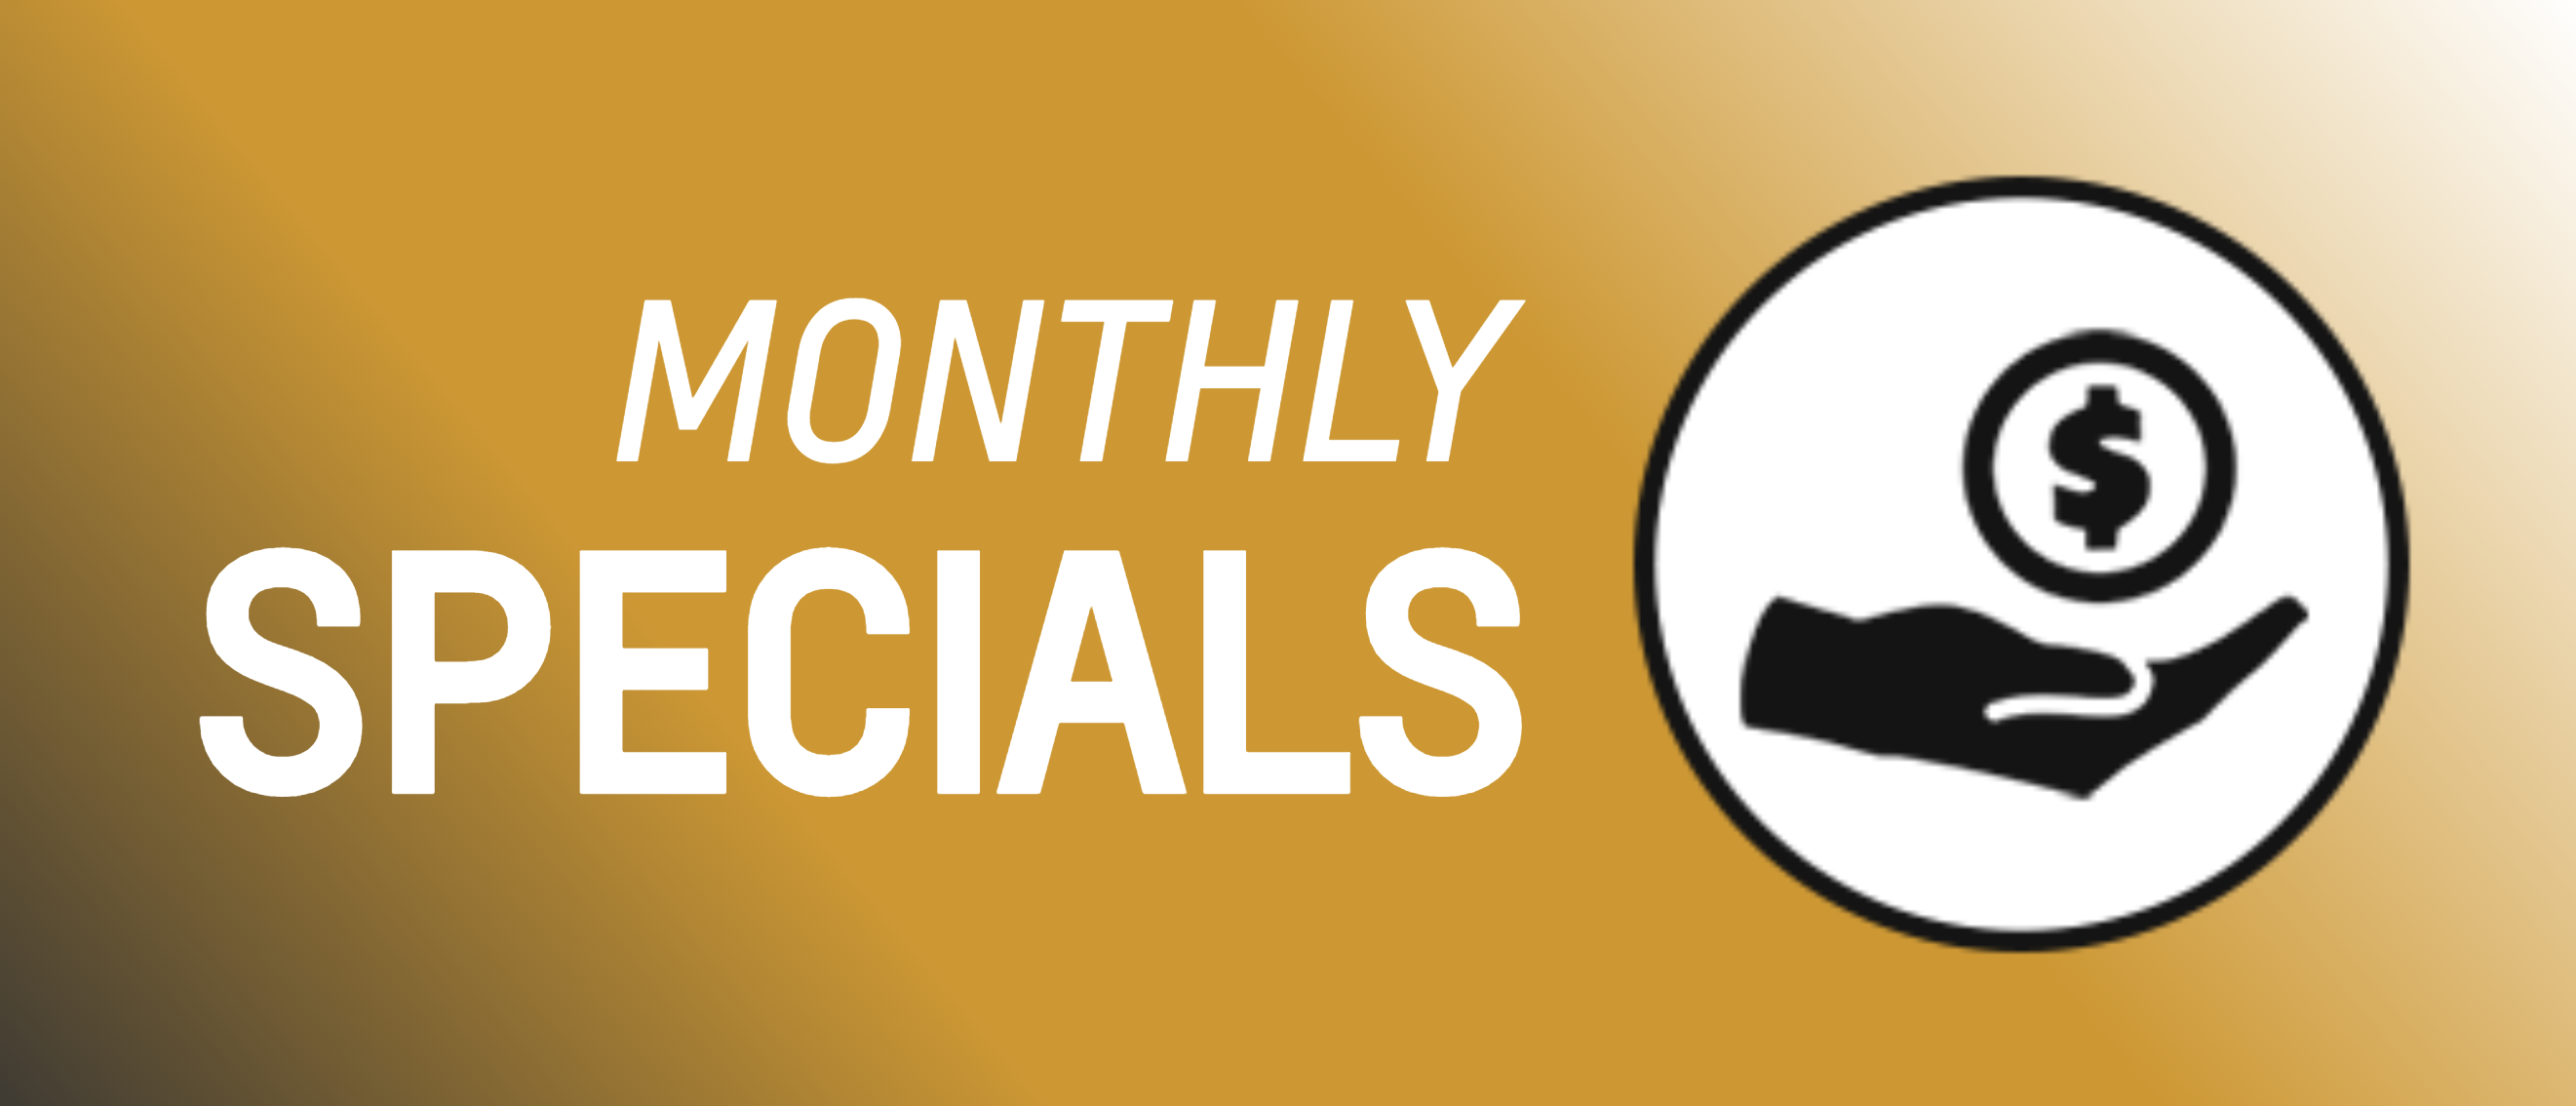 Monthly Specials Tile